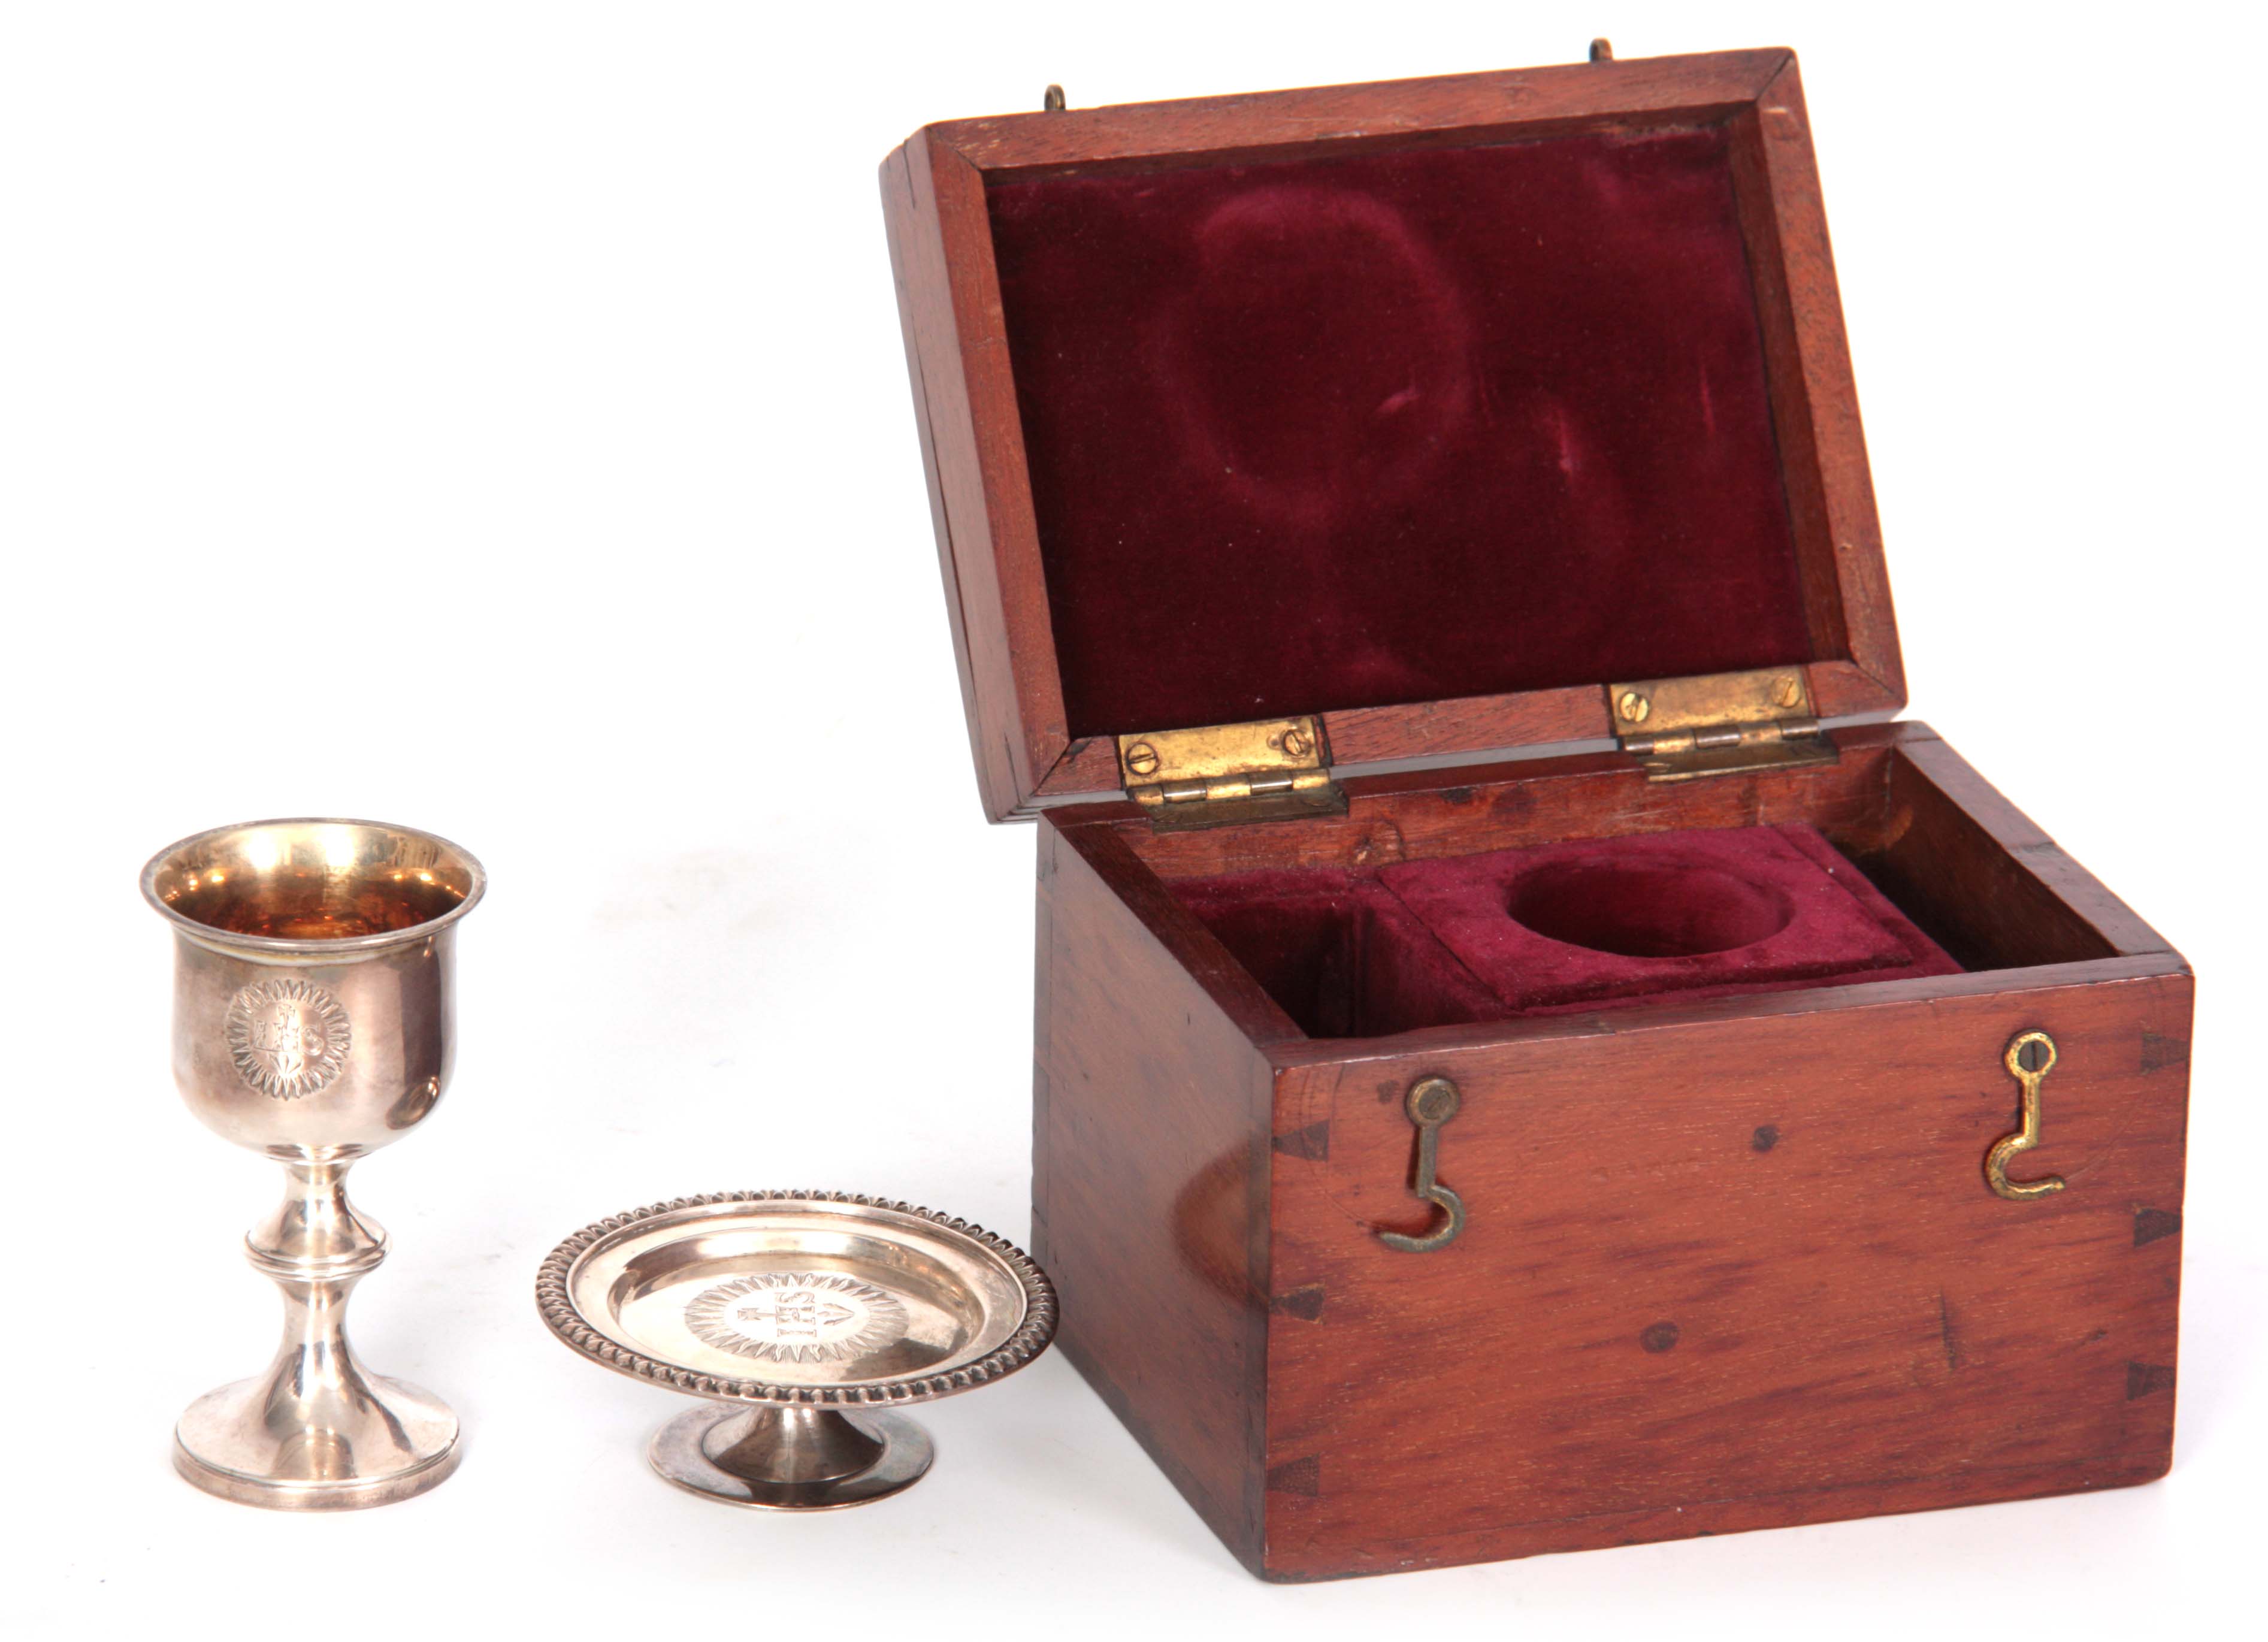 A GEORGE IV SILVER COMMUNION SET IN ORIGINAL MAHOGANY BOX comprising chalice and paten both with